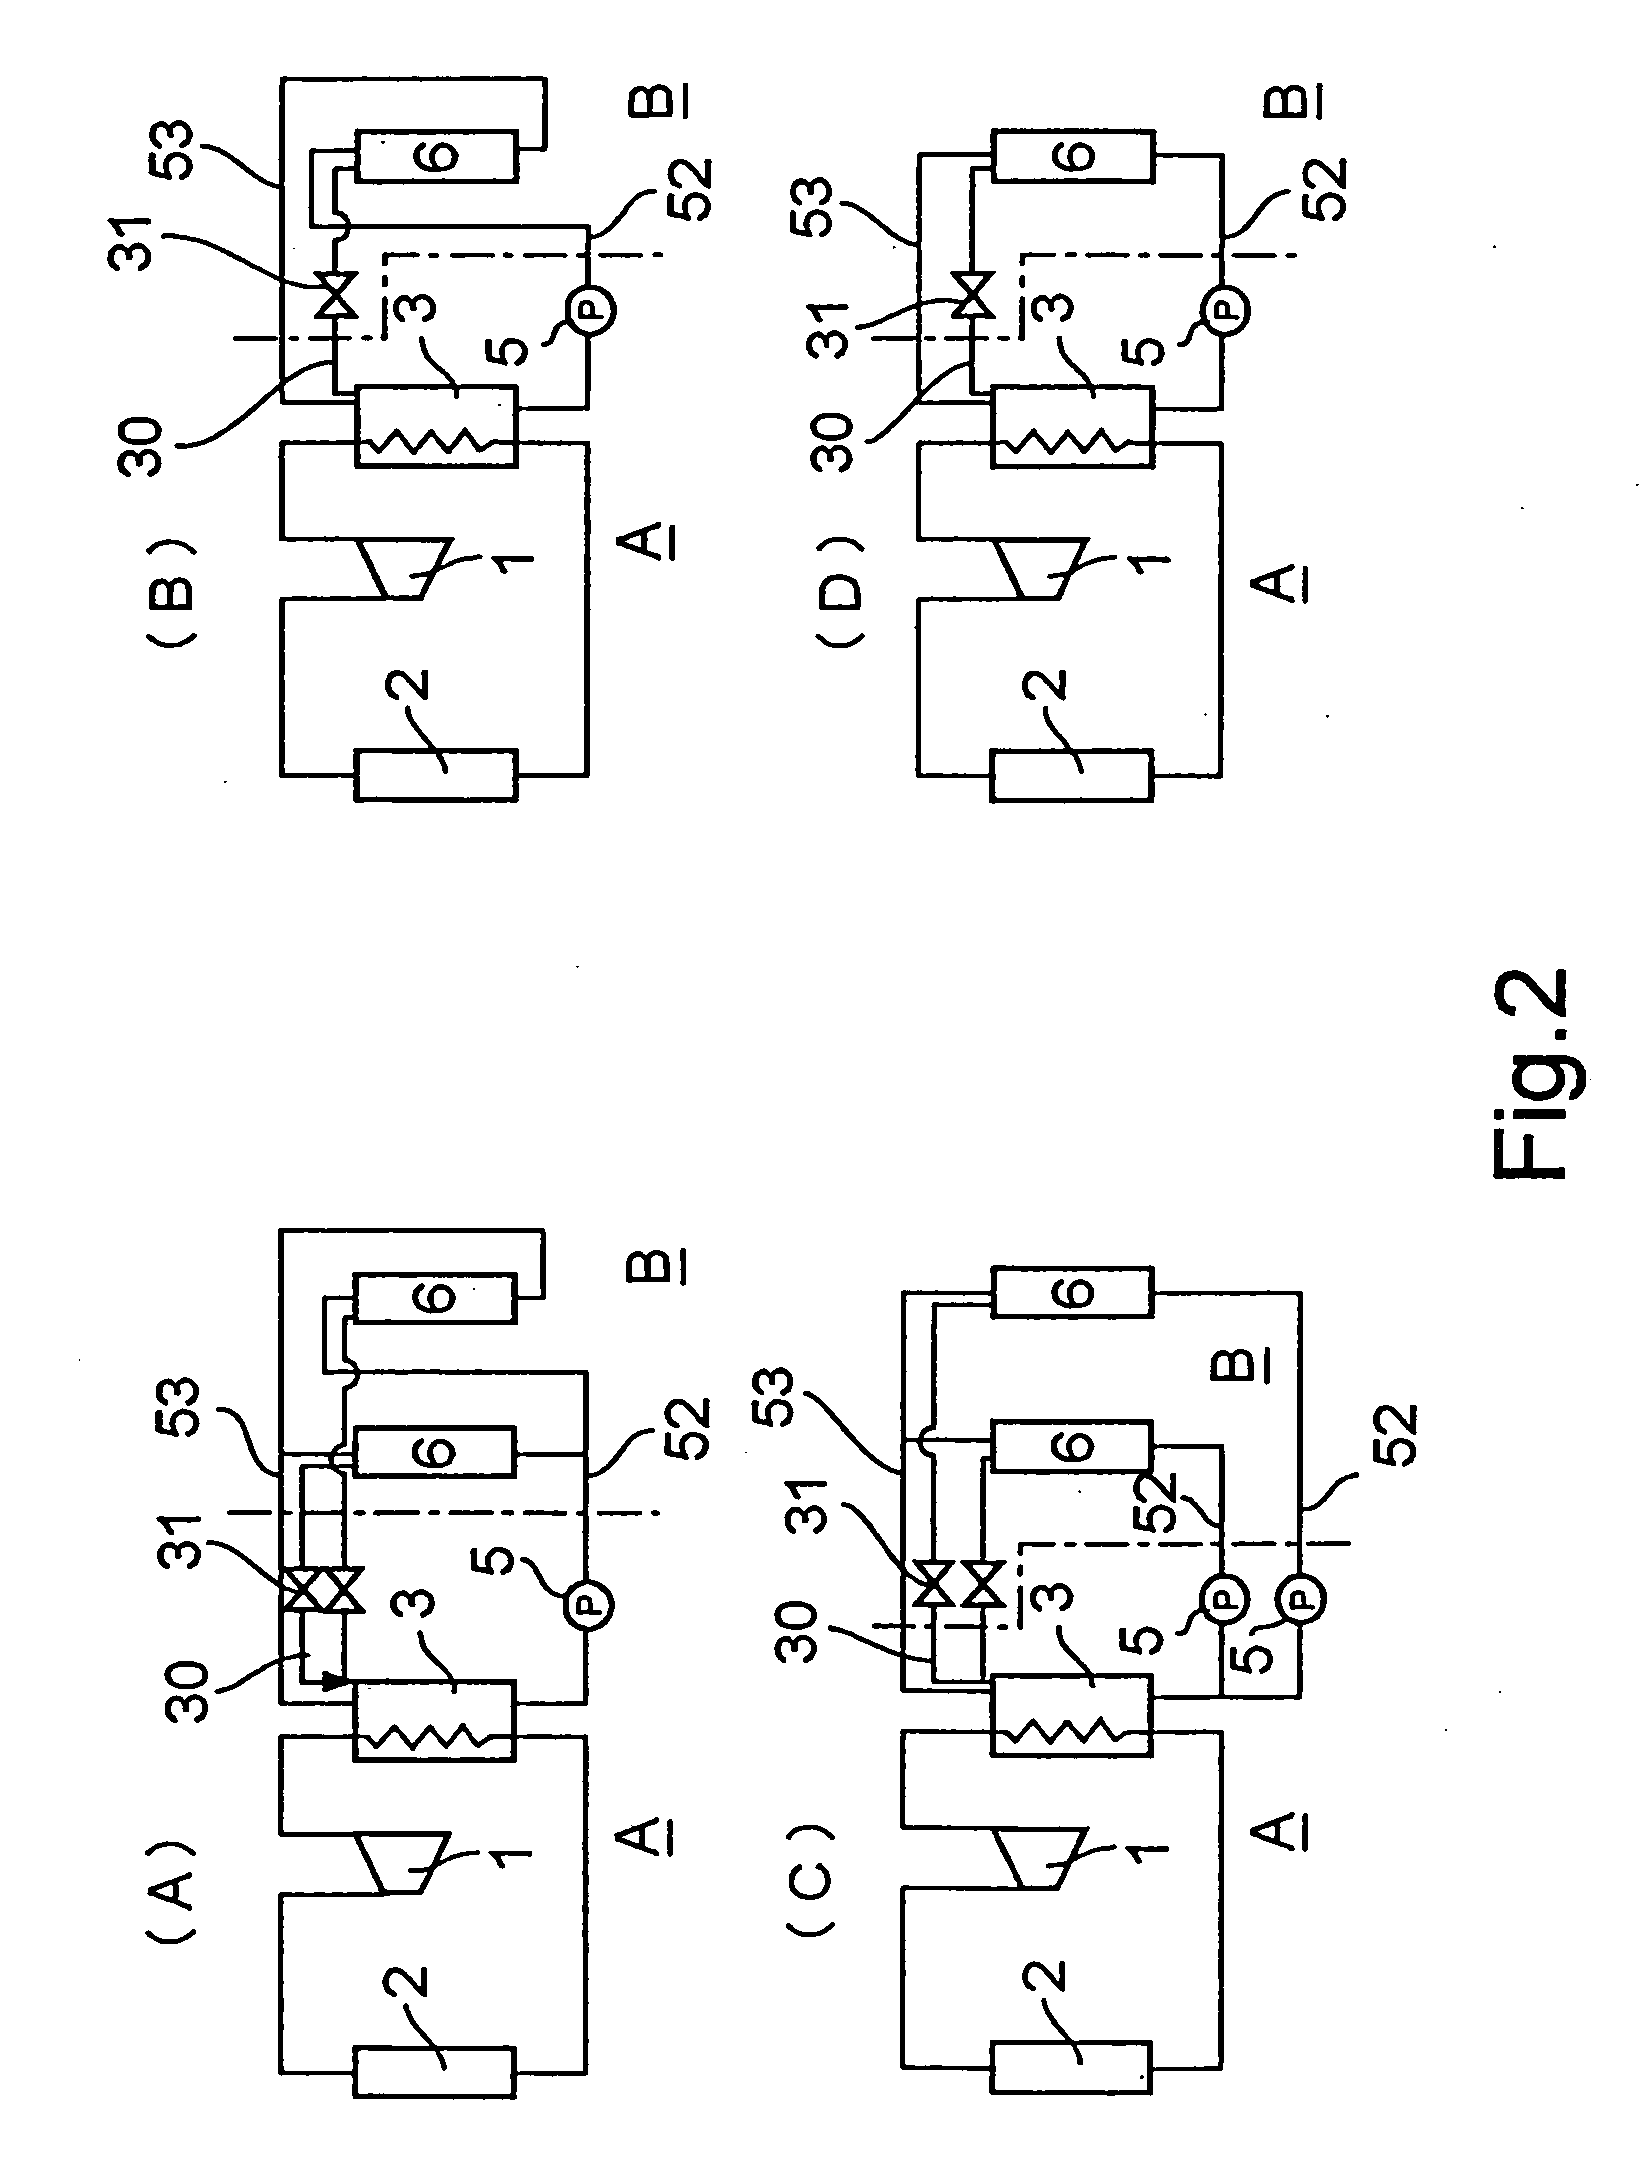 Ammonia/CO2 refrigeration system, CO2 brine production system for use therein, and ammonia cooling unit incorporating that production system